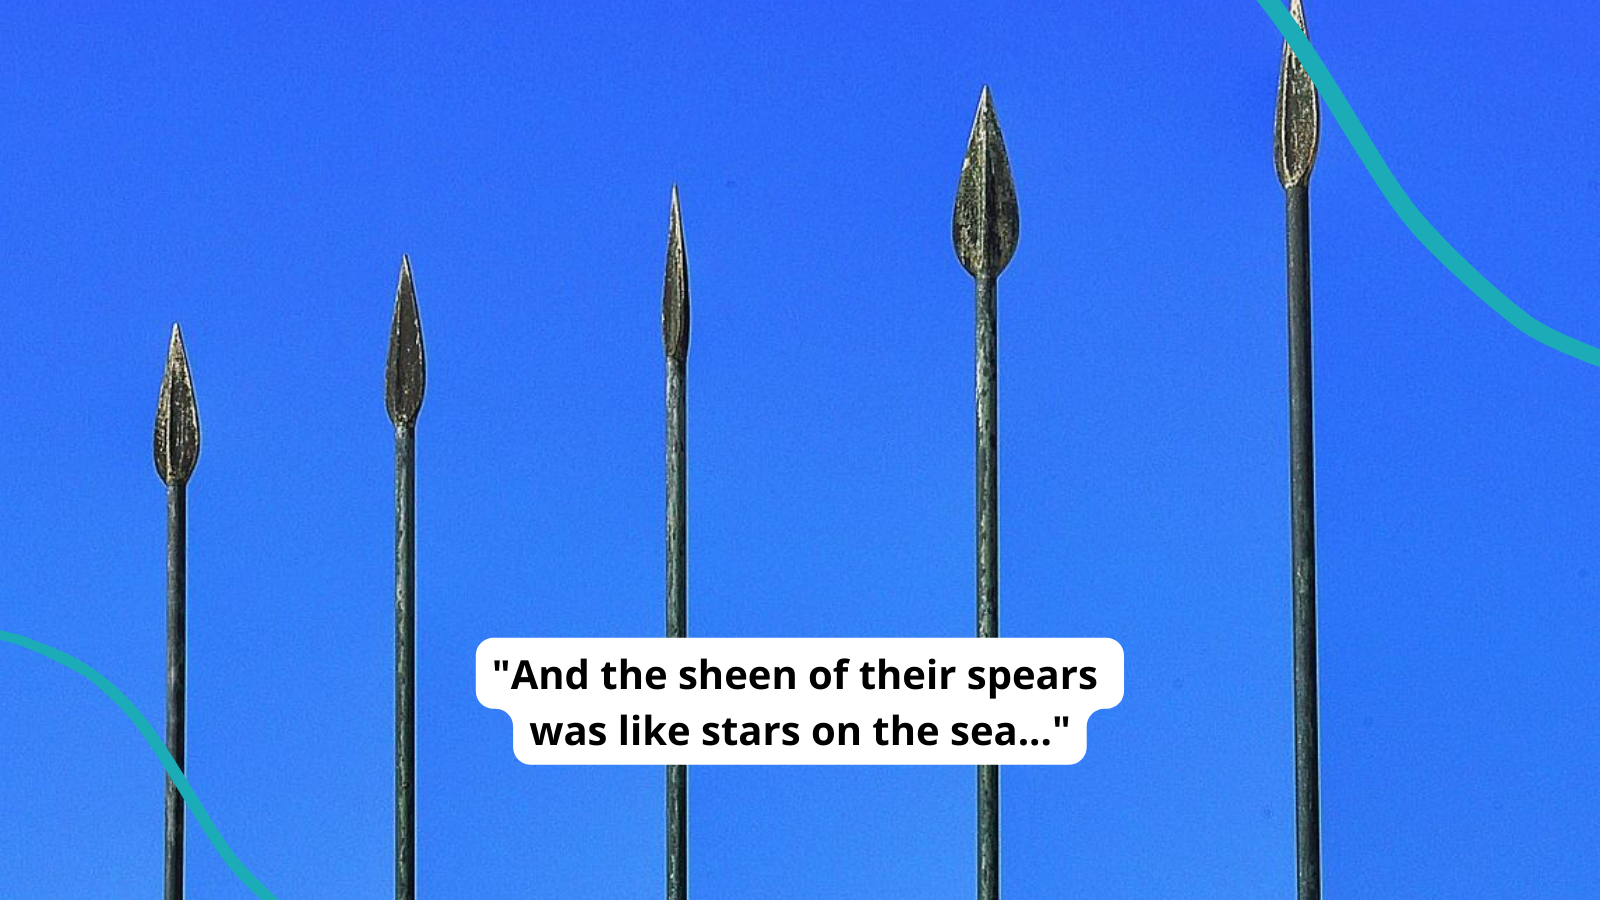 Row of spears against a blue sky. Text reads "And the sheen of their spears was like stars on the sea."